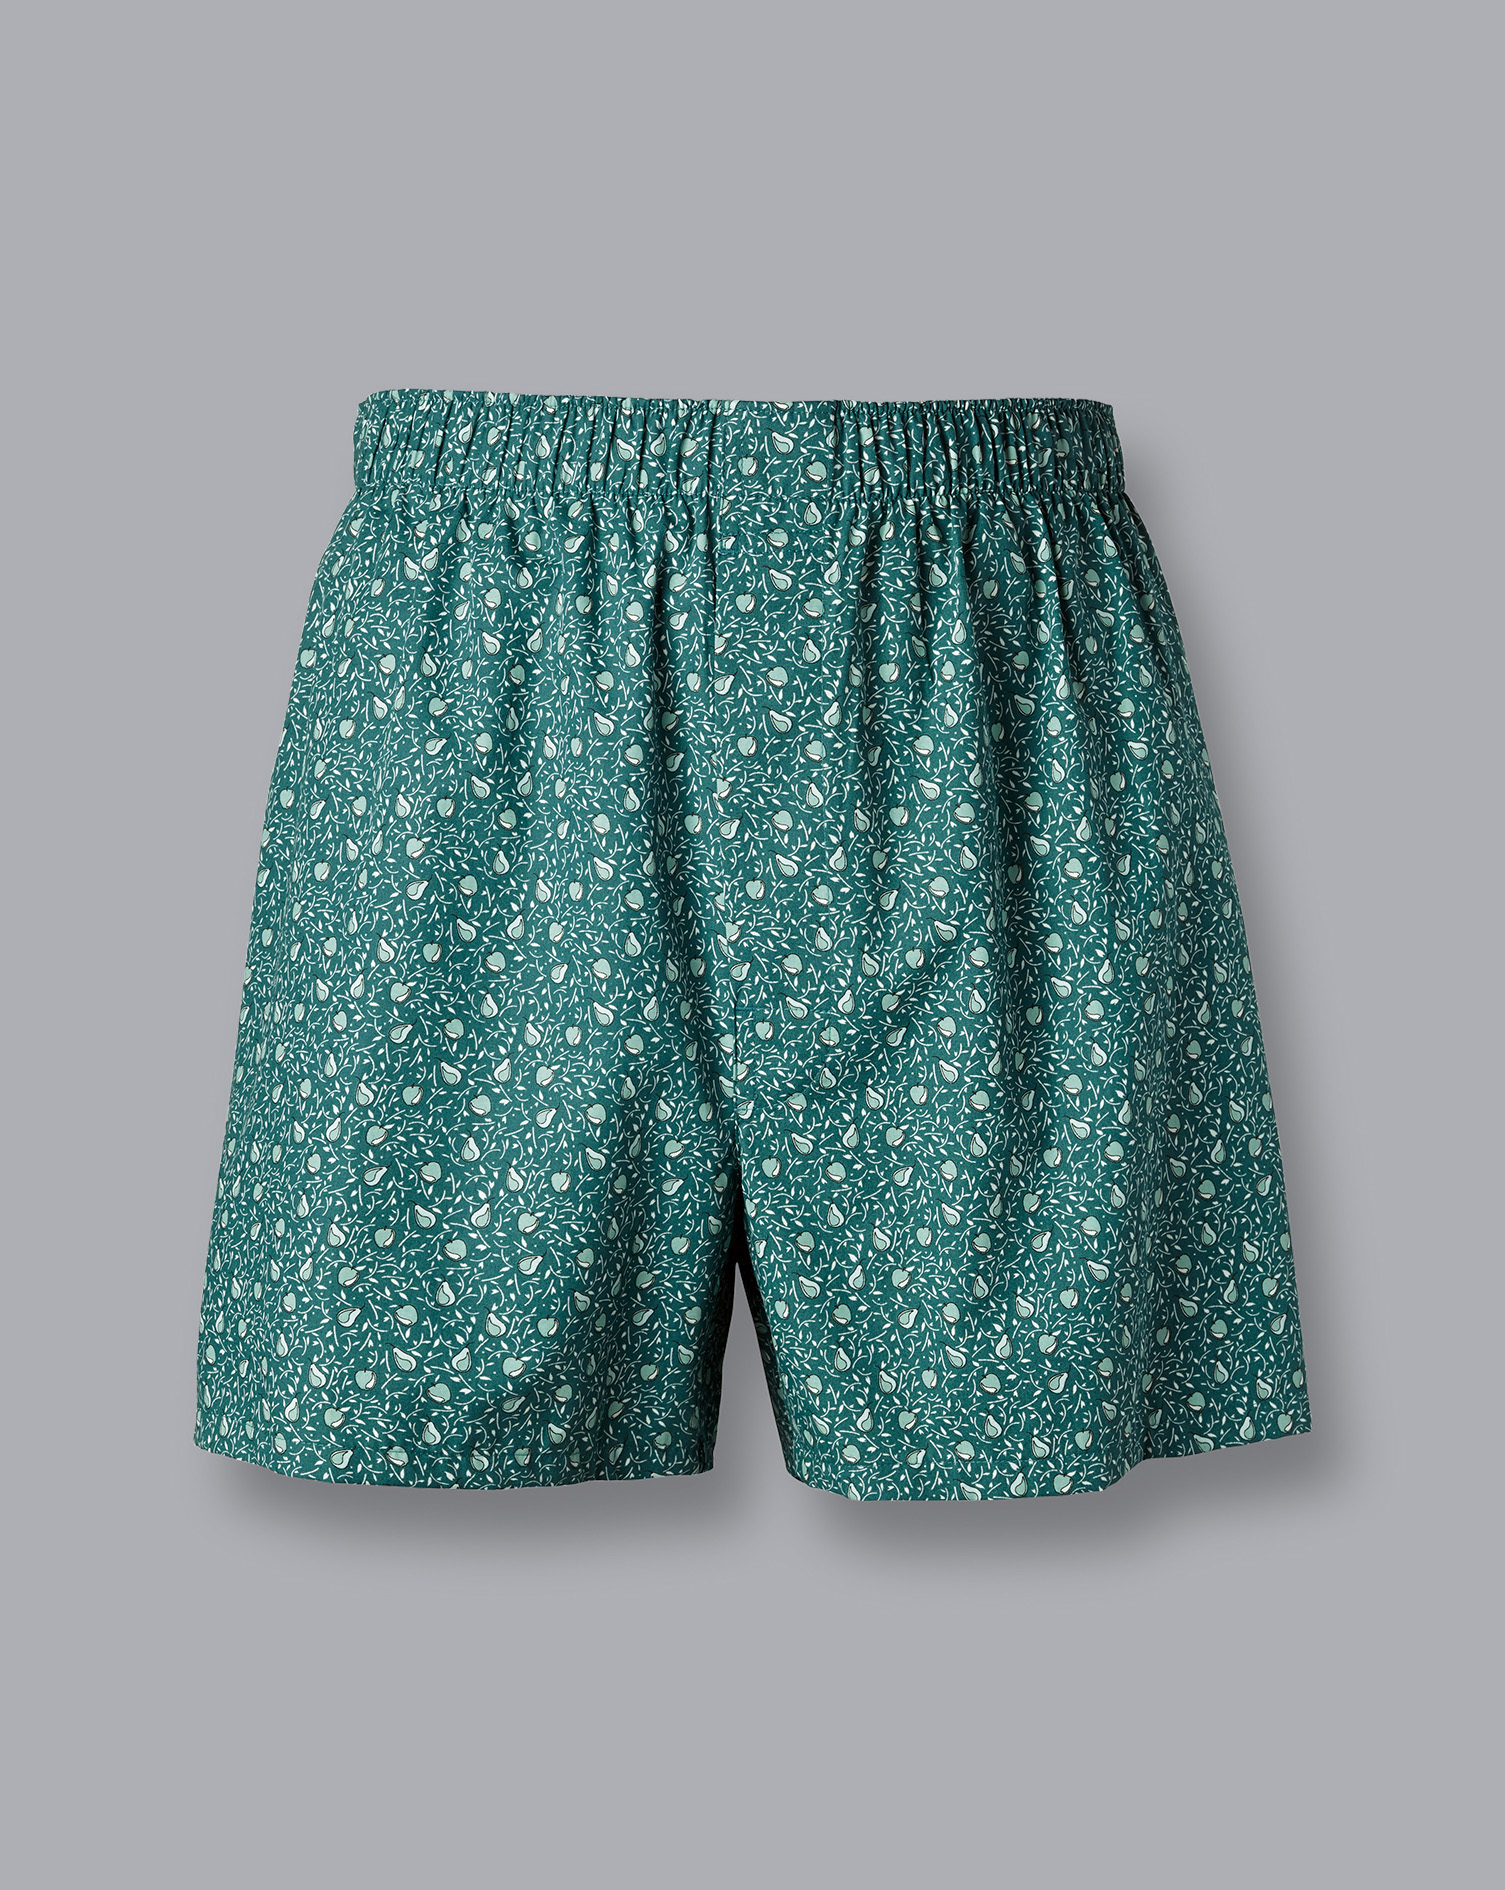 Men's Charles Tyrwhitt Apples and Pears Motif Woven Boxers - Pale Teal Green Size Small Cotton
